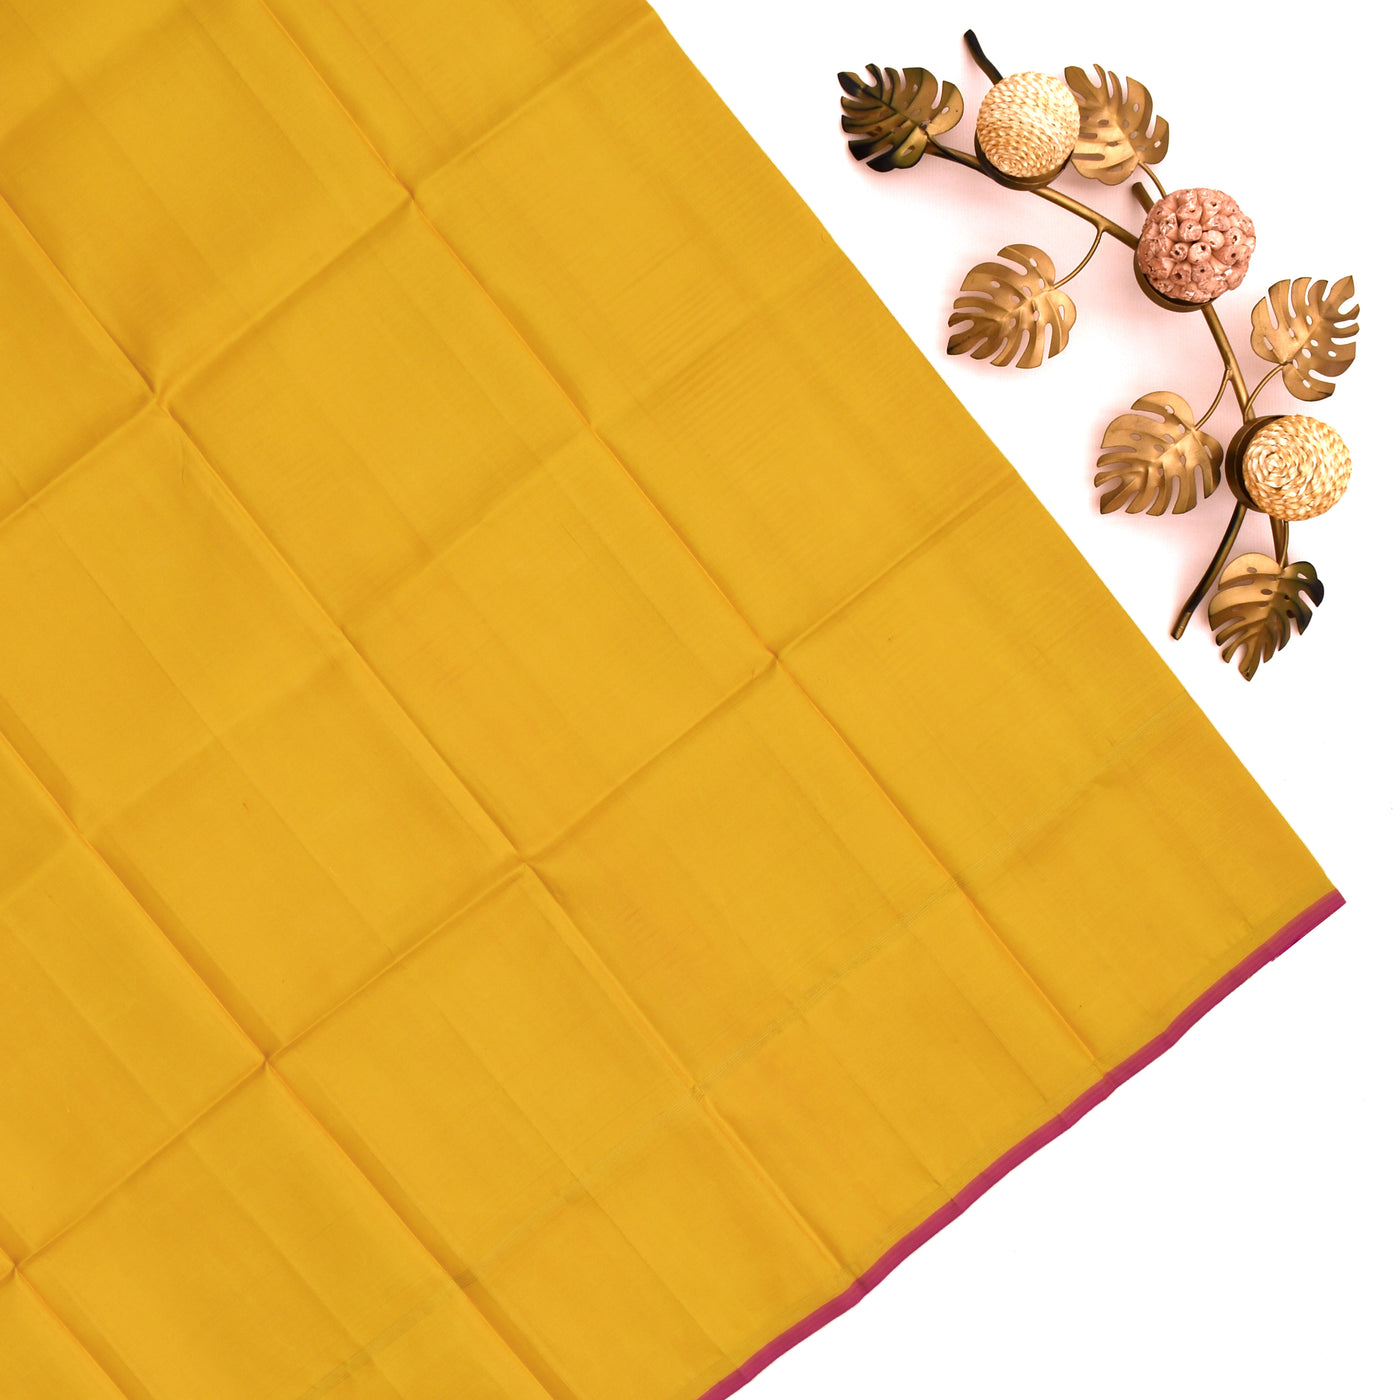 Off White Printed Kanchi Silk Saree with Small Checked Design